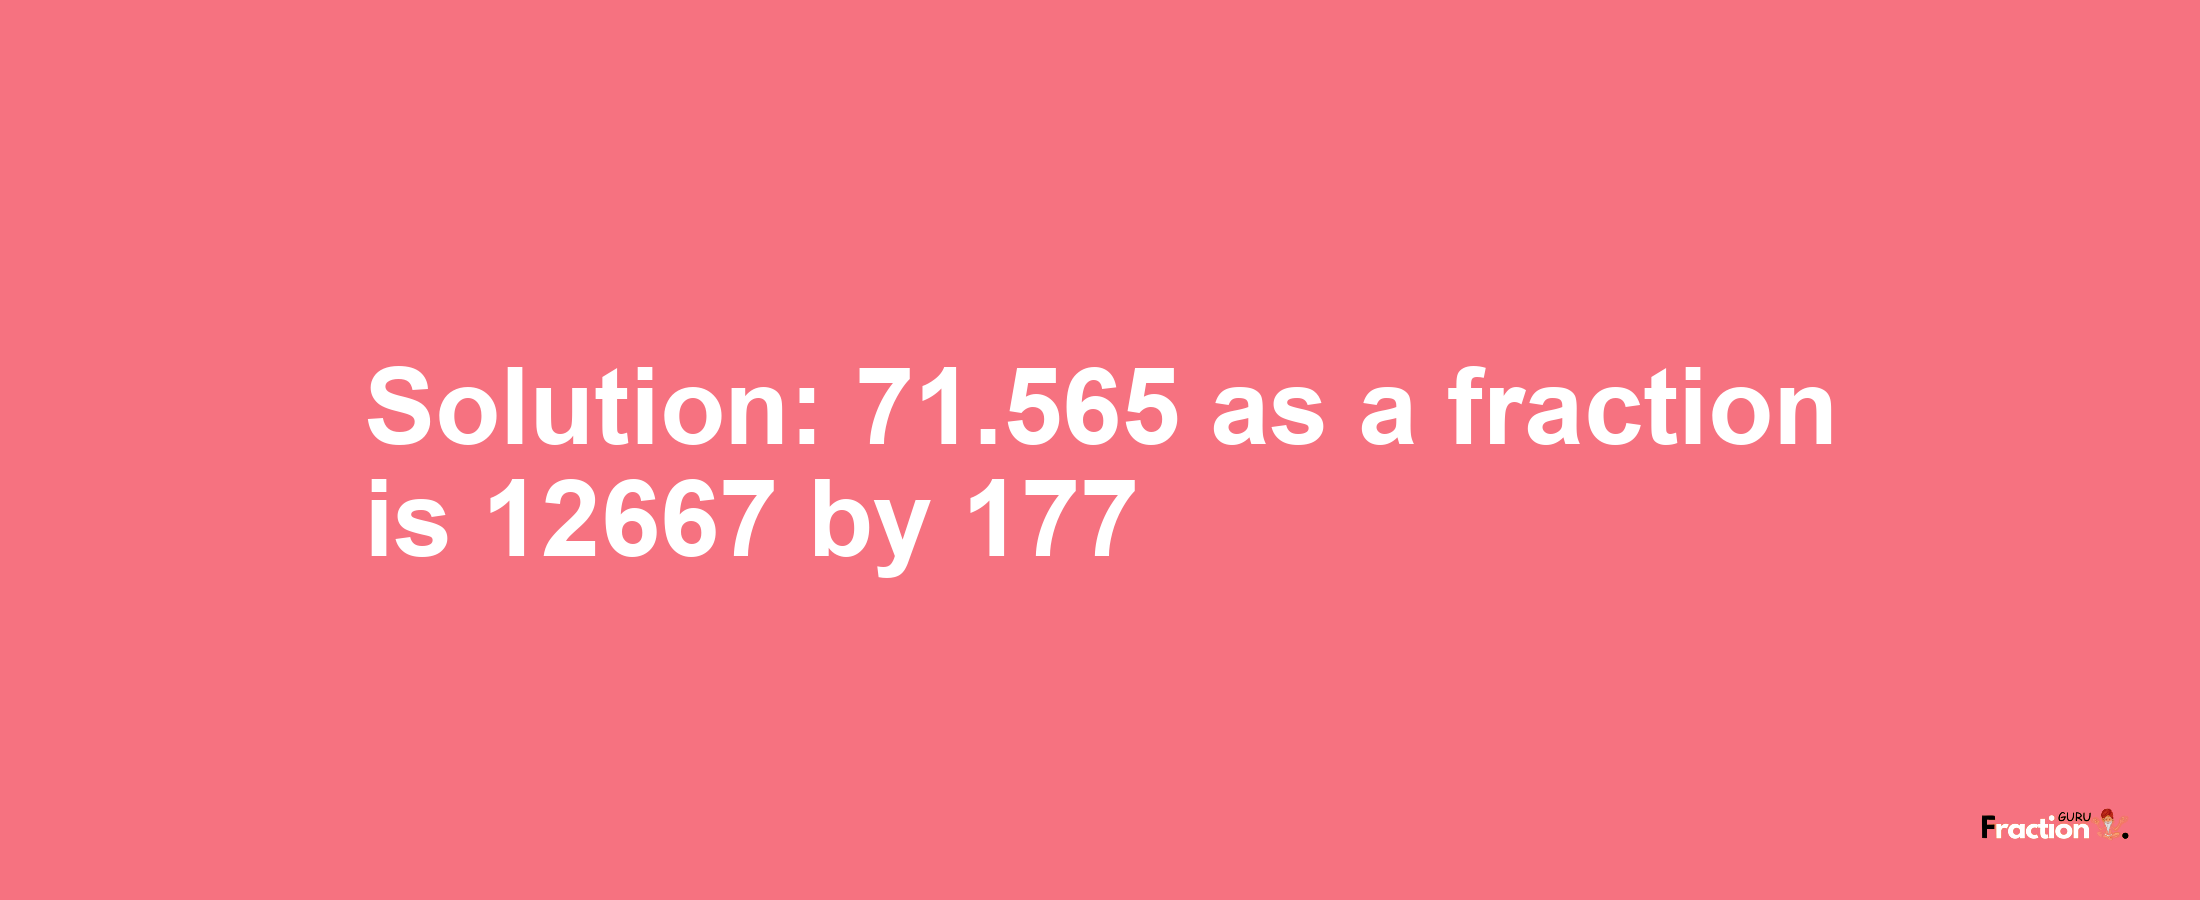 Solution:71.565 as a fraction is 12667/177